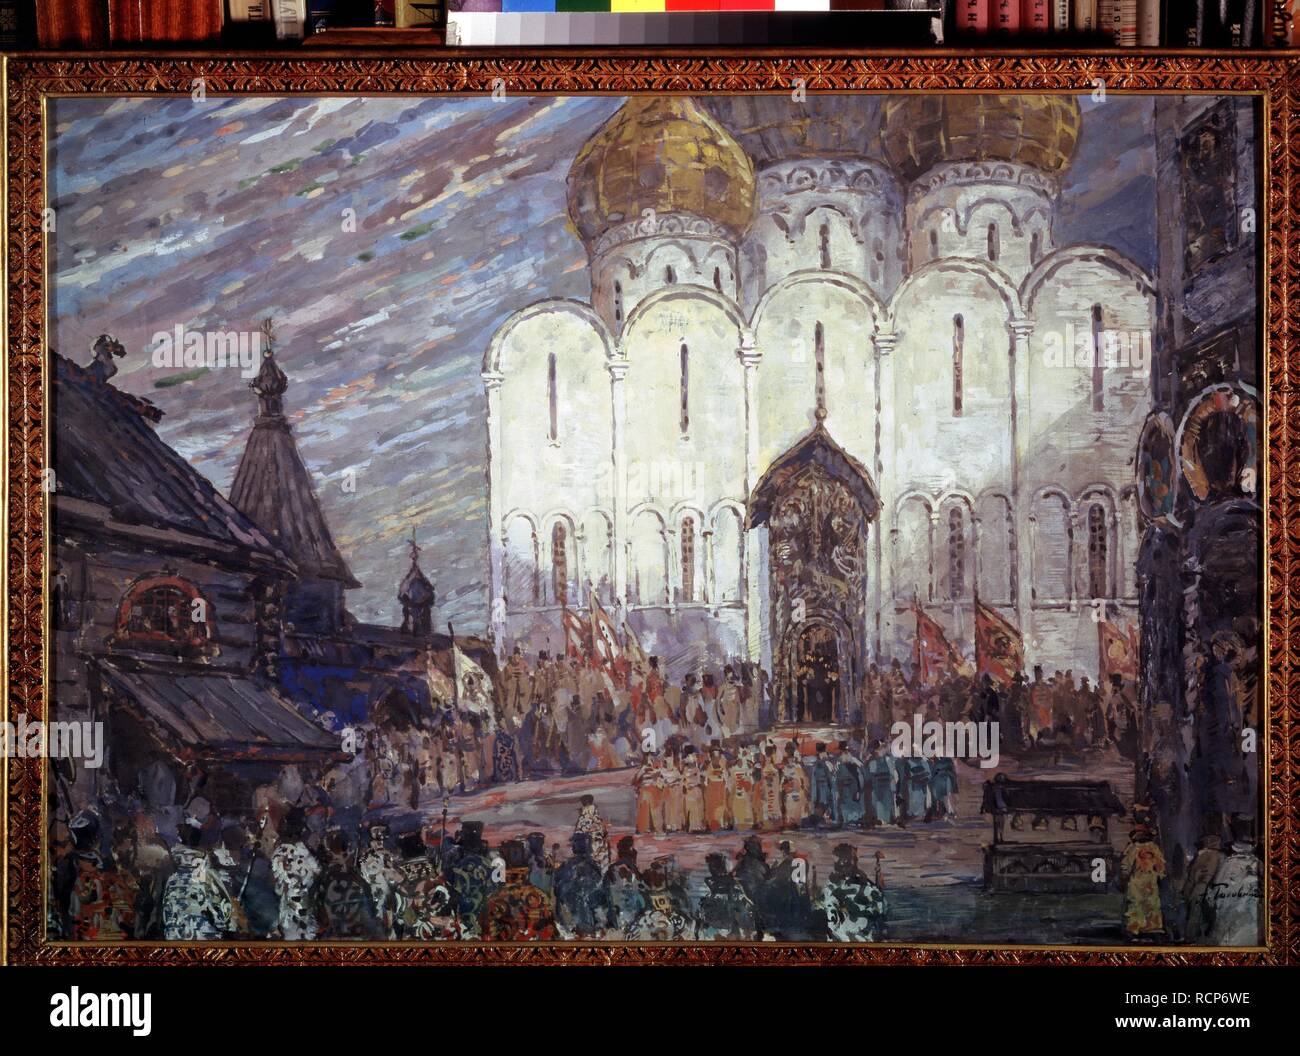 Stage design for the opera Boris Godunov by M. Musorgsky. Museum: PRIVATE COLLECTION. Author: Golovin, Alexander Yakovlevich. Stock Photo